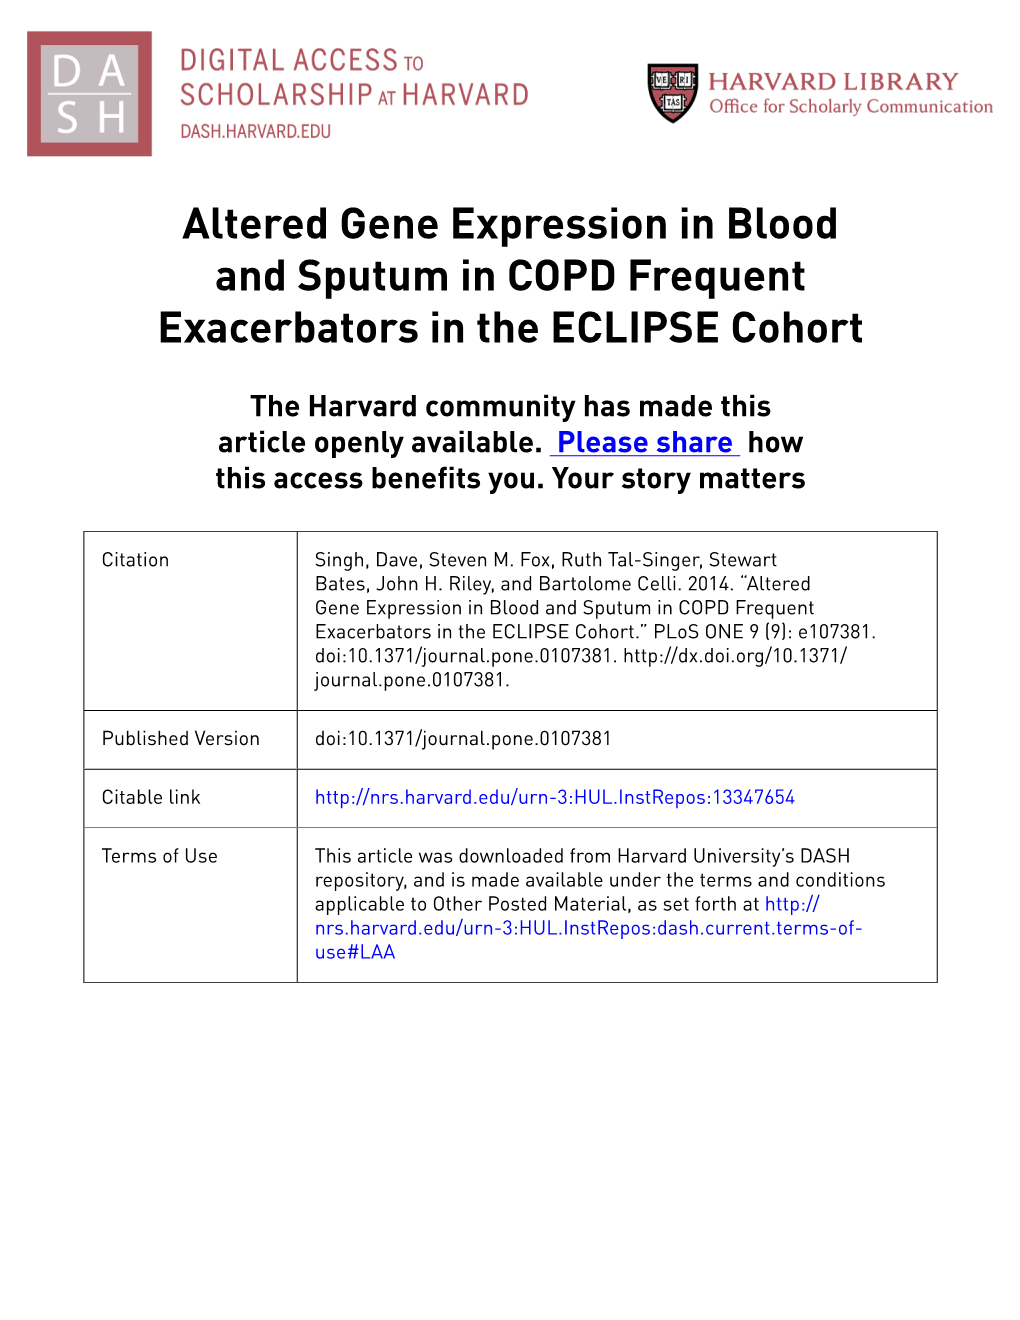 Altered Gene Expression in Blood and Sputum in COPD Frequent Exacerbators in the ECLIPSE Cohort